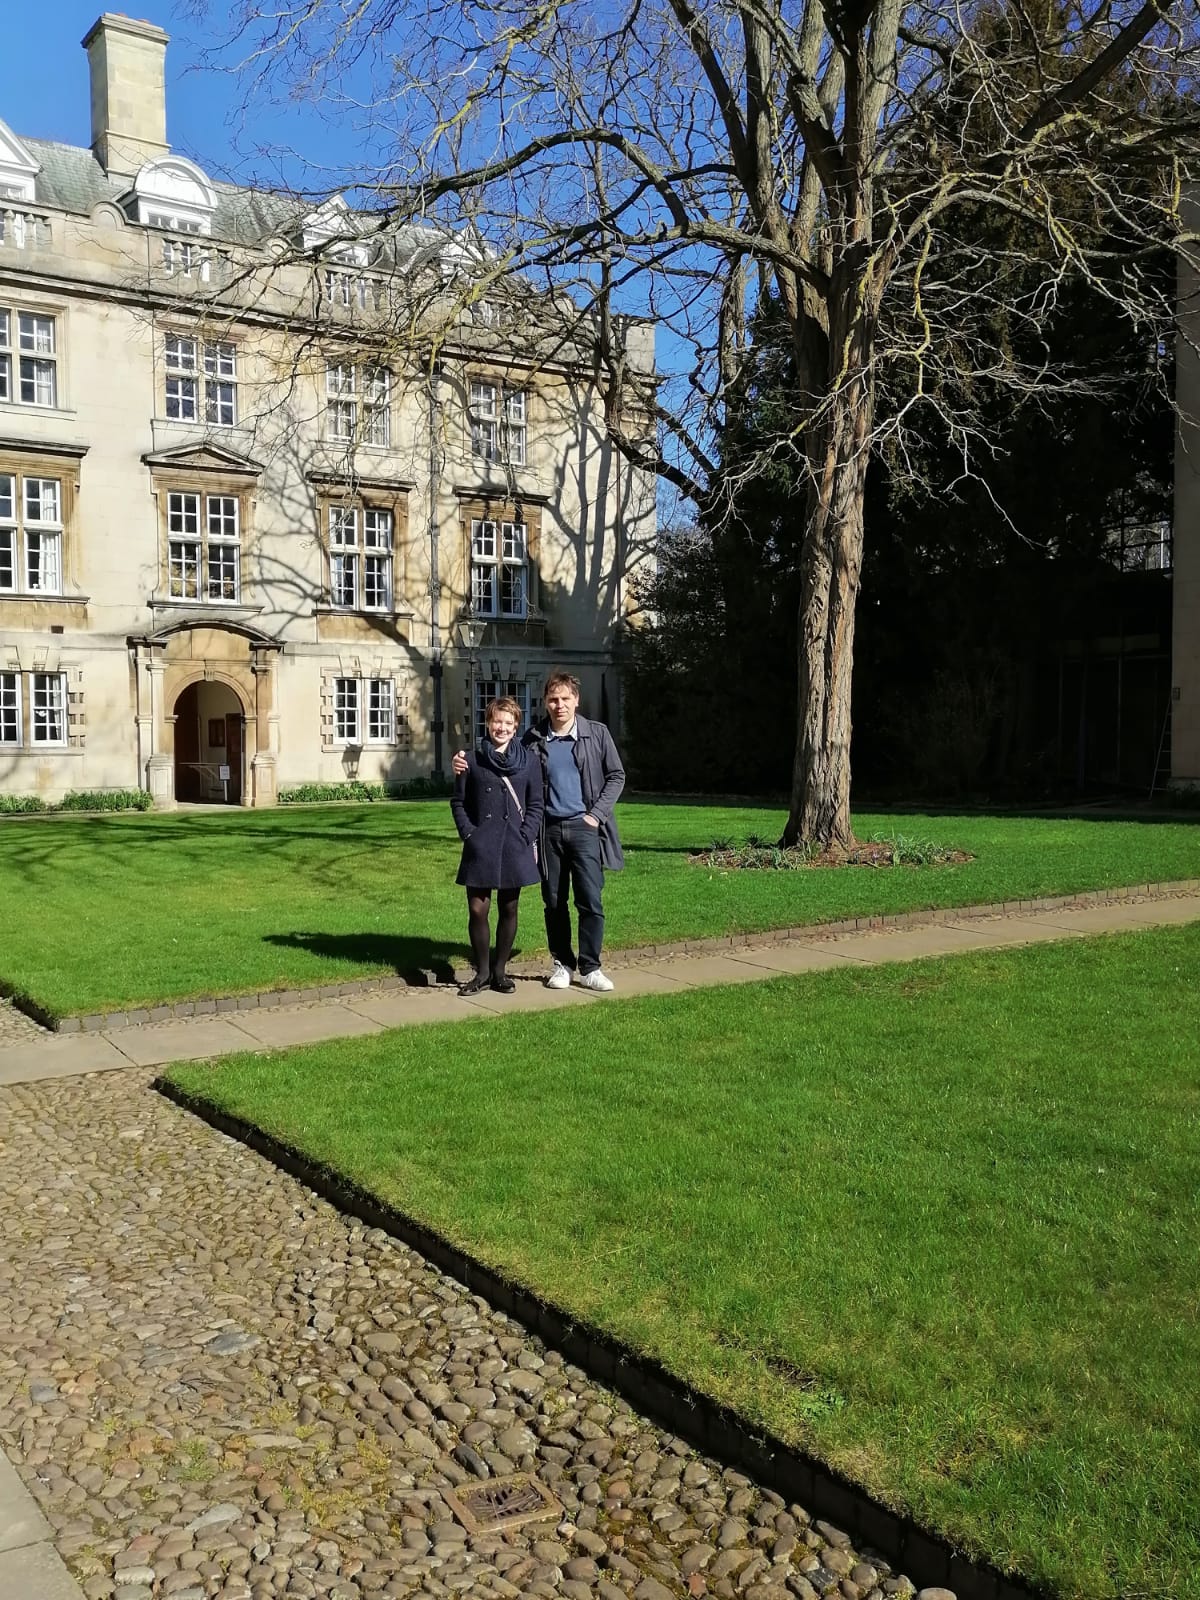 A student and their parent stood on a lawn in front of the Fellows' building in second court